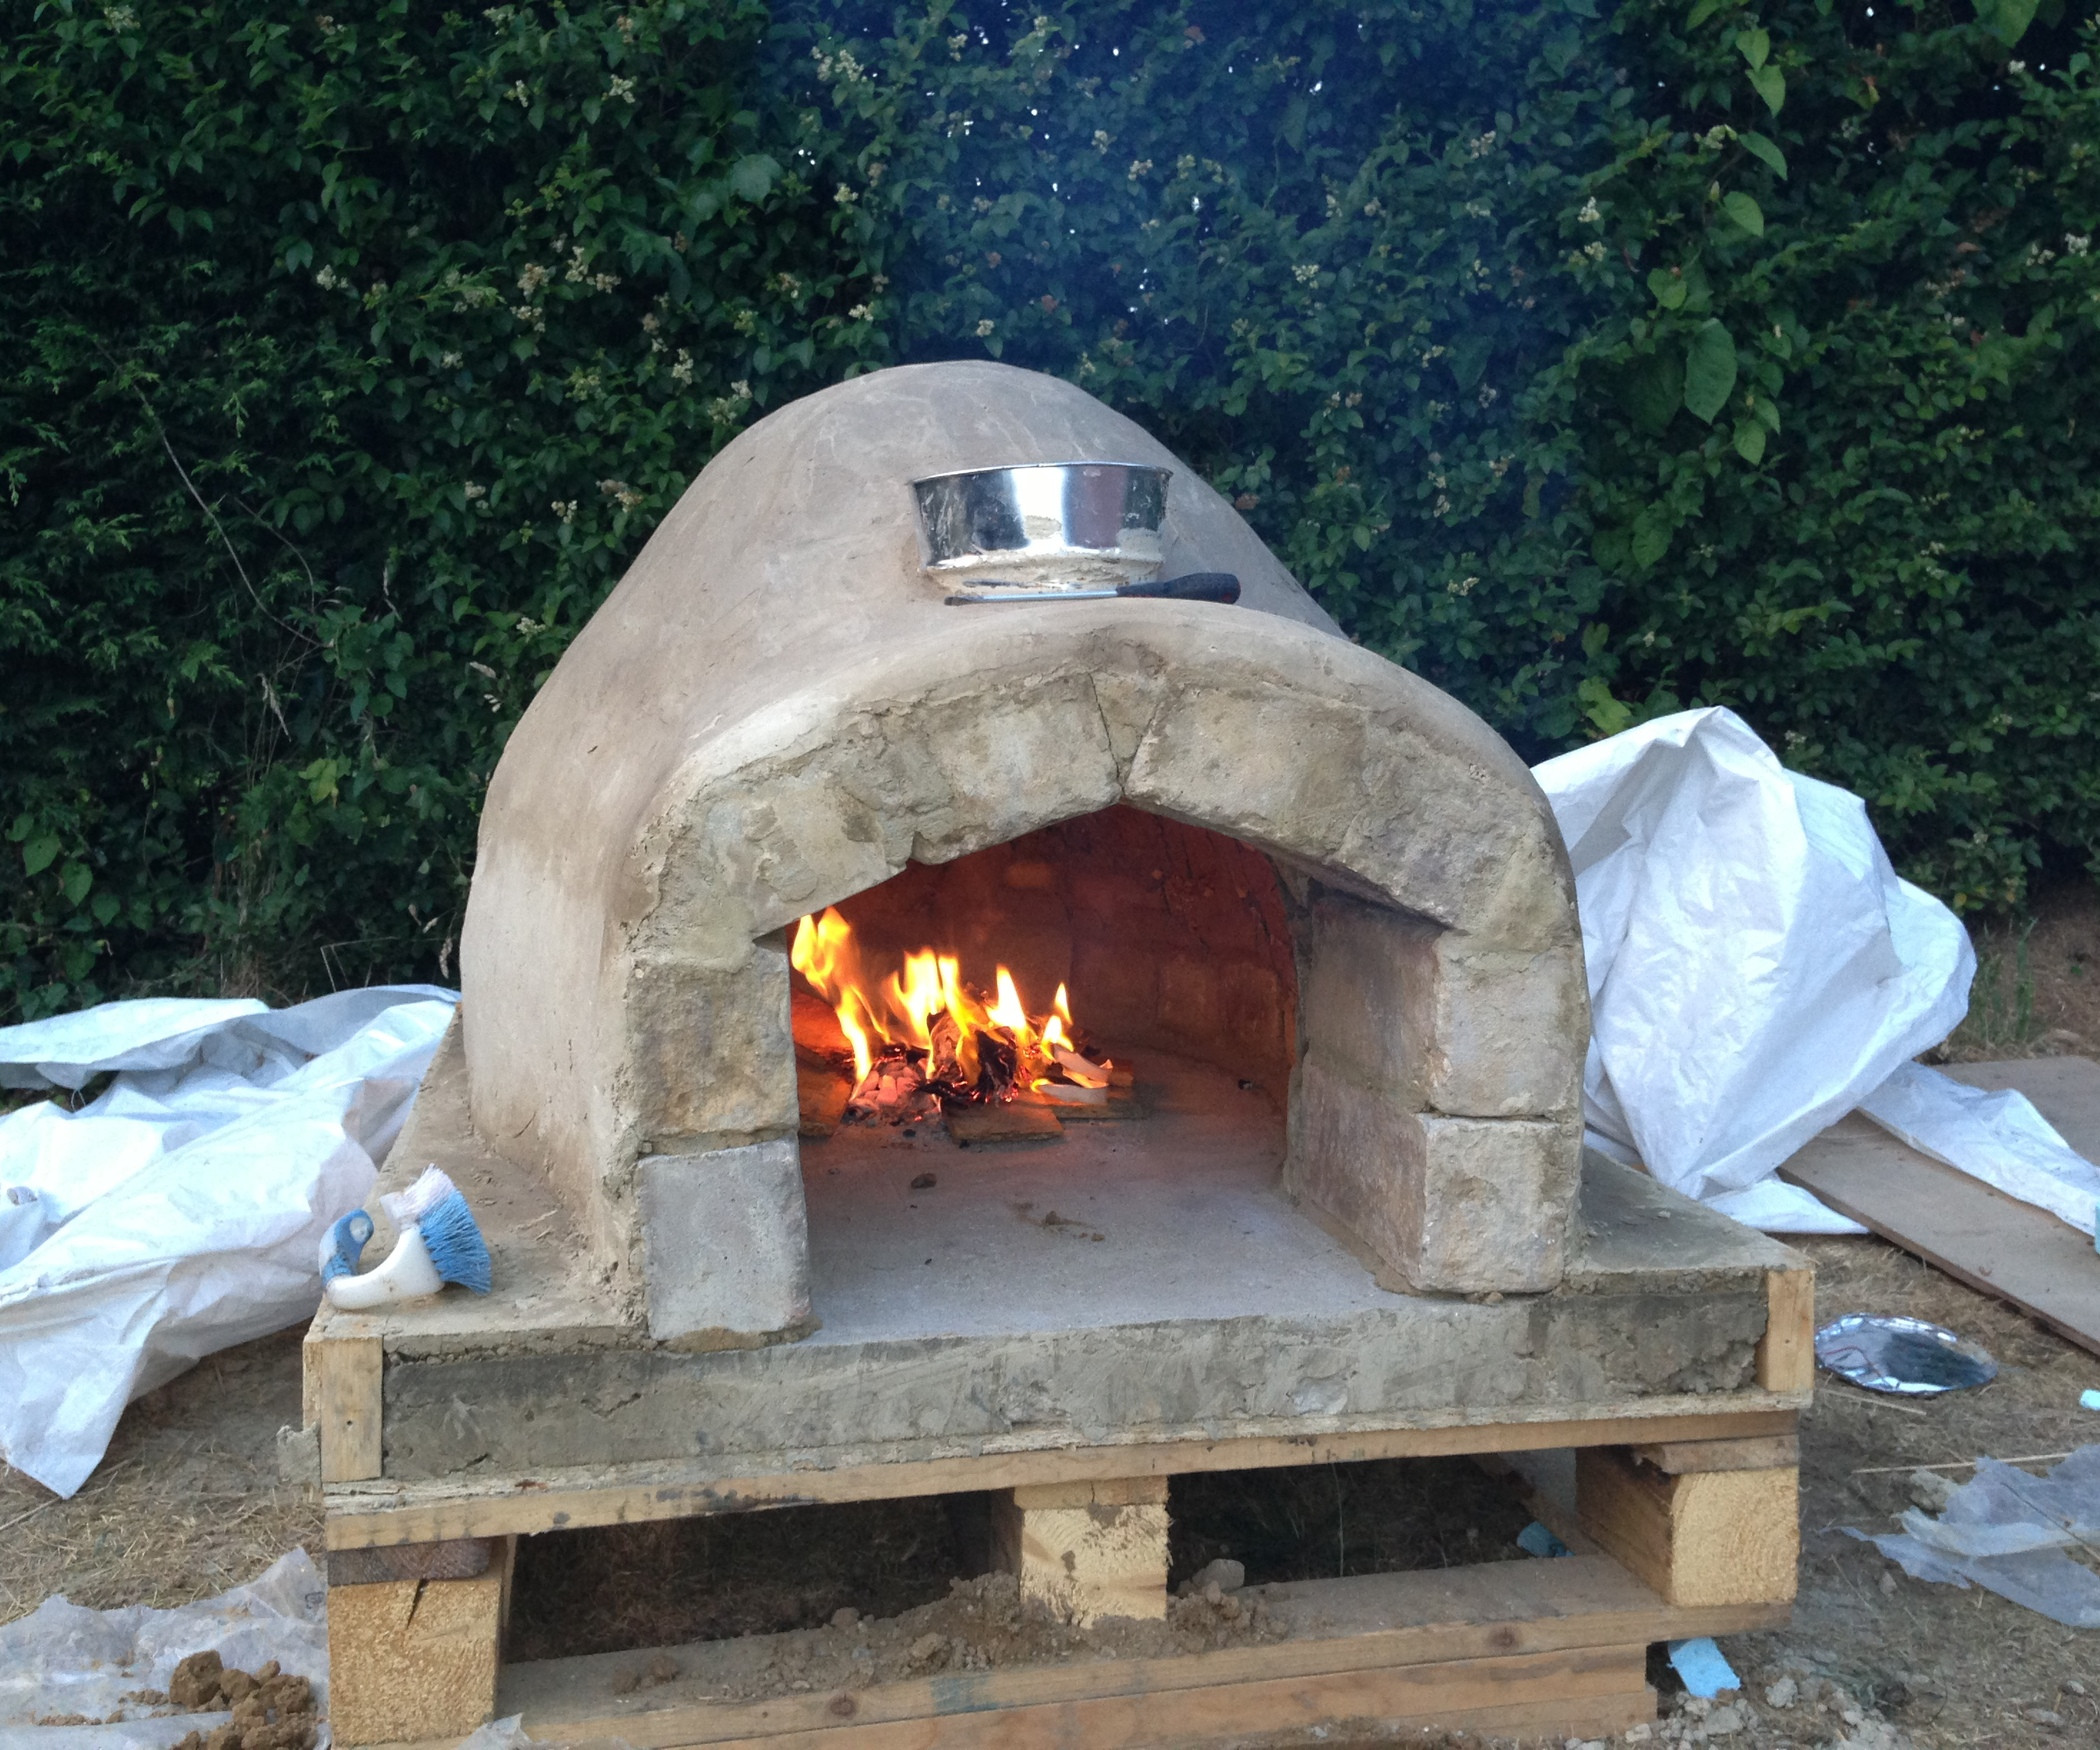 DIY Outdoor Pizza Oven
 How to Make a Homemade Pizza Oven